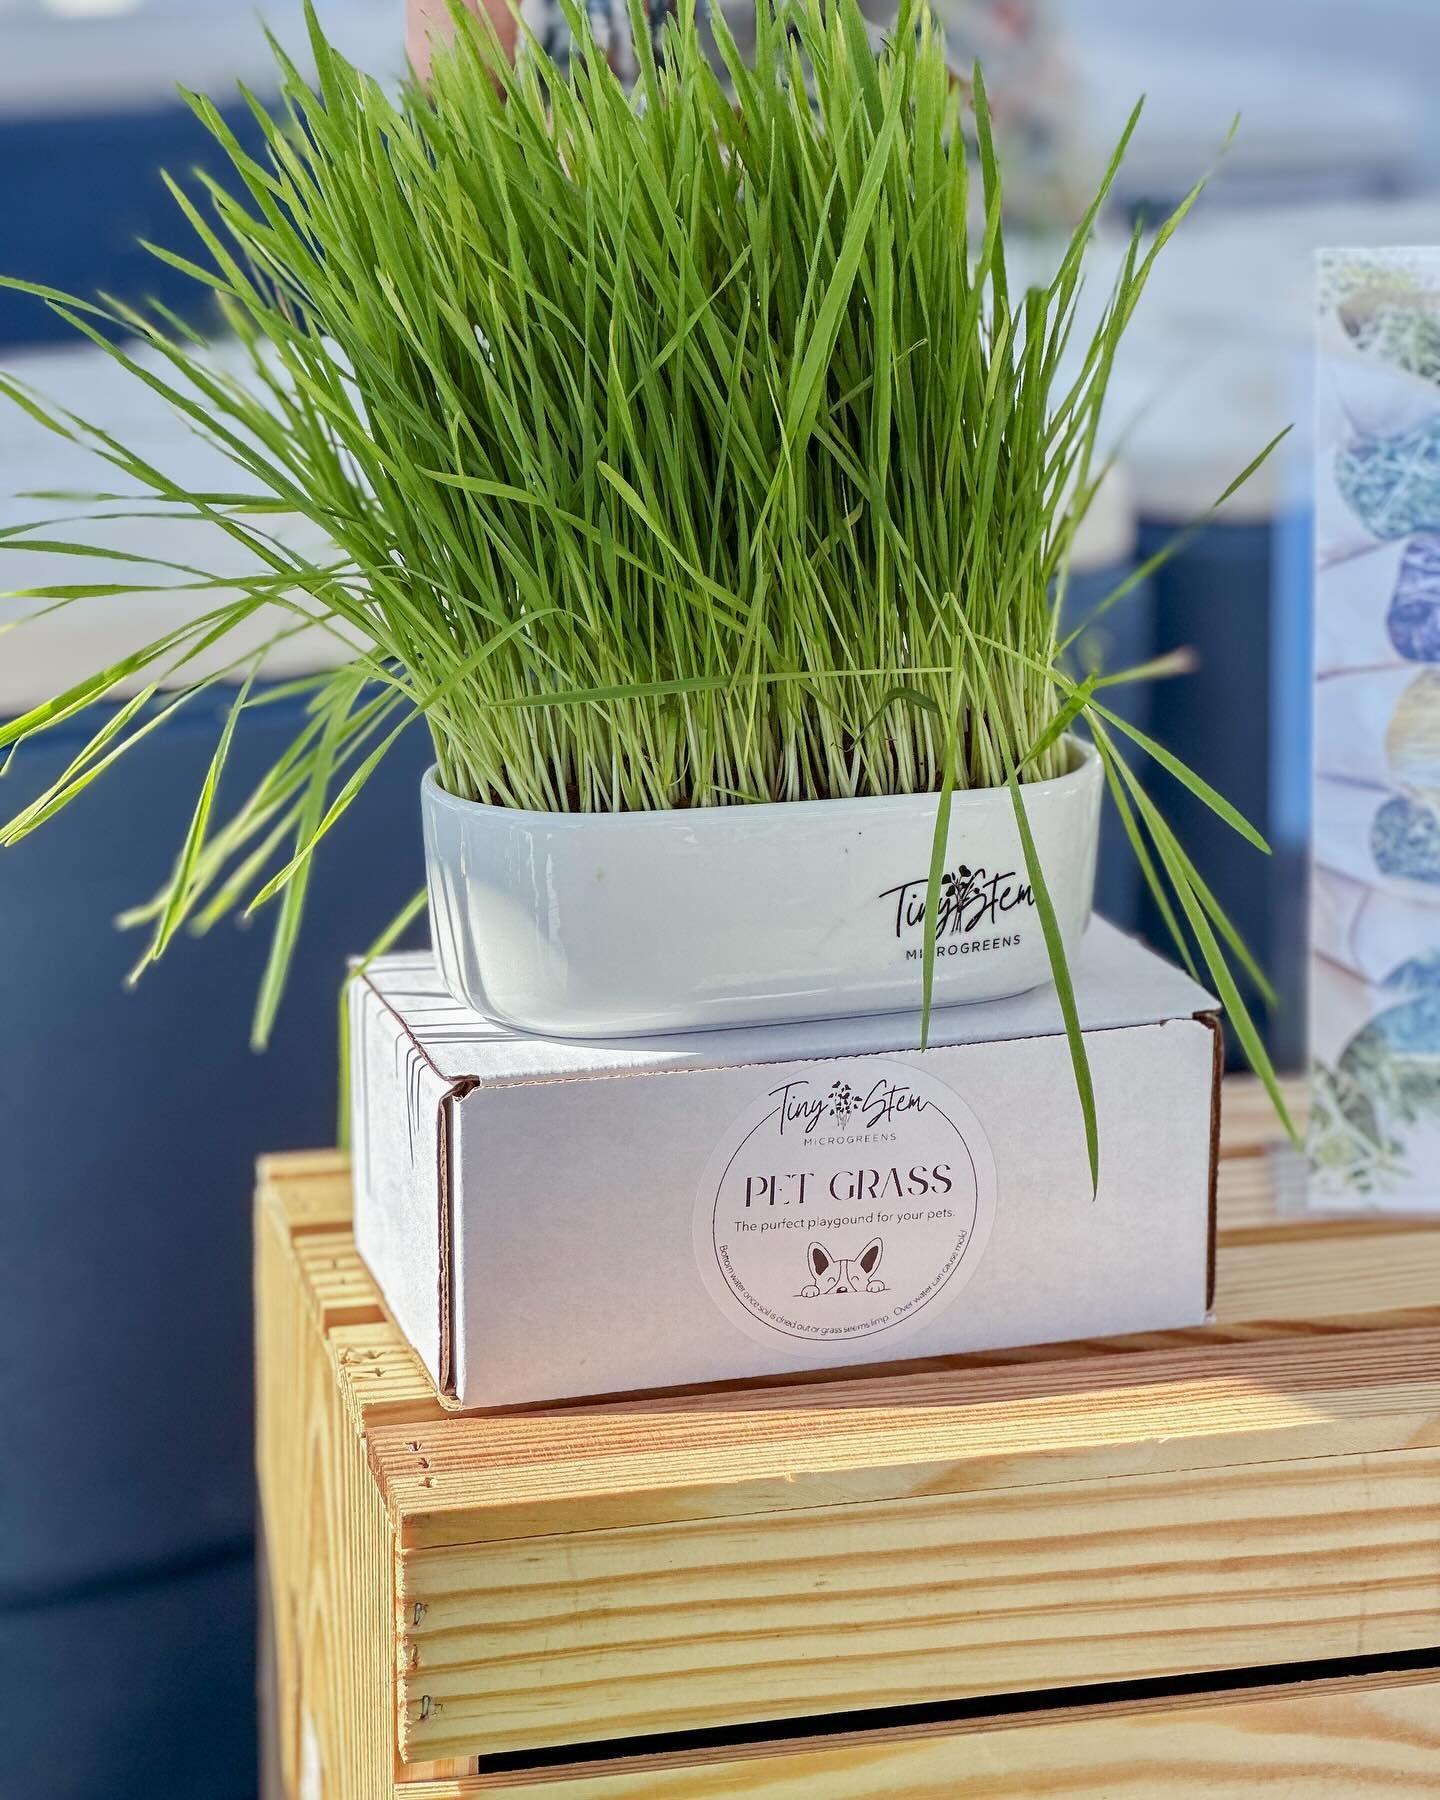 Our Pet Grass Grow Kits have been a HUGE HIT since we launched! 🚀 We&rsquo;re overwhelmed by the love and support we&rsquo;ve received from all of you 🙏

Now, it&rsquo;s your chance to see them in action in person 🤩!

We&rsquo;re showcasing our pr